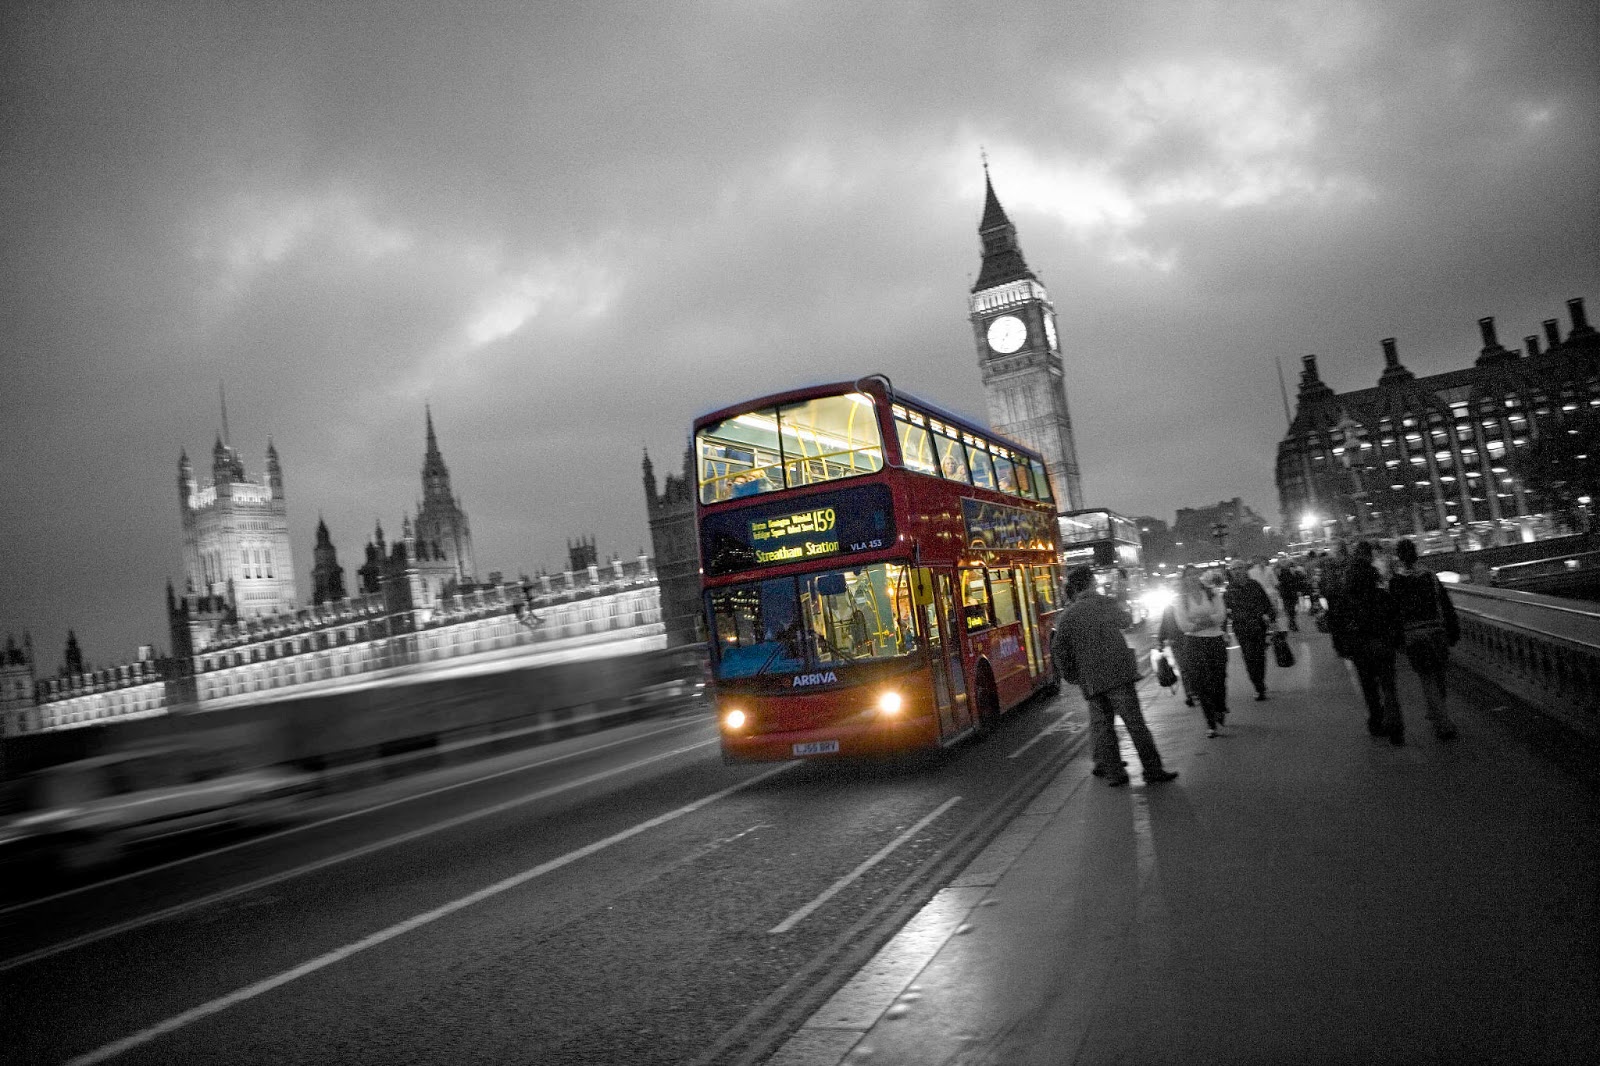 London bus black and white photography with color | Black and ...